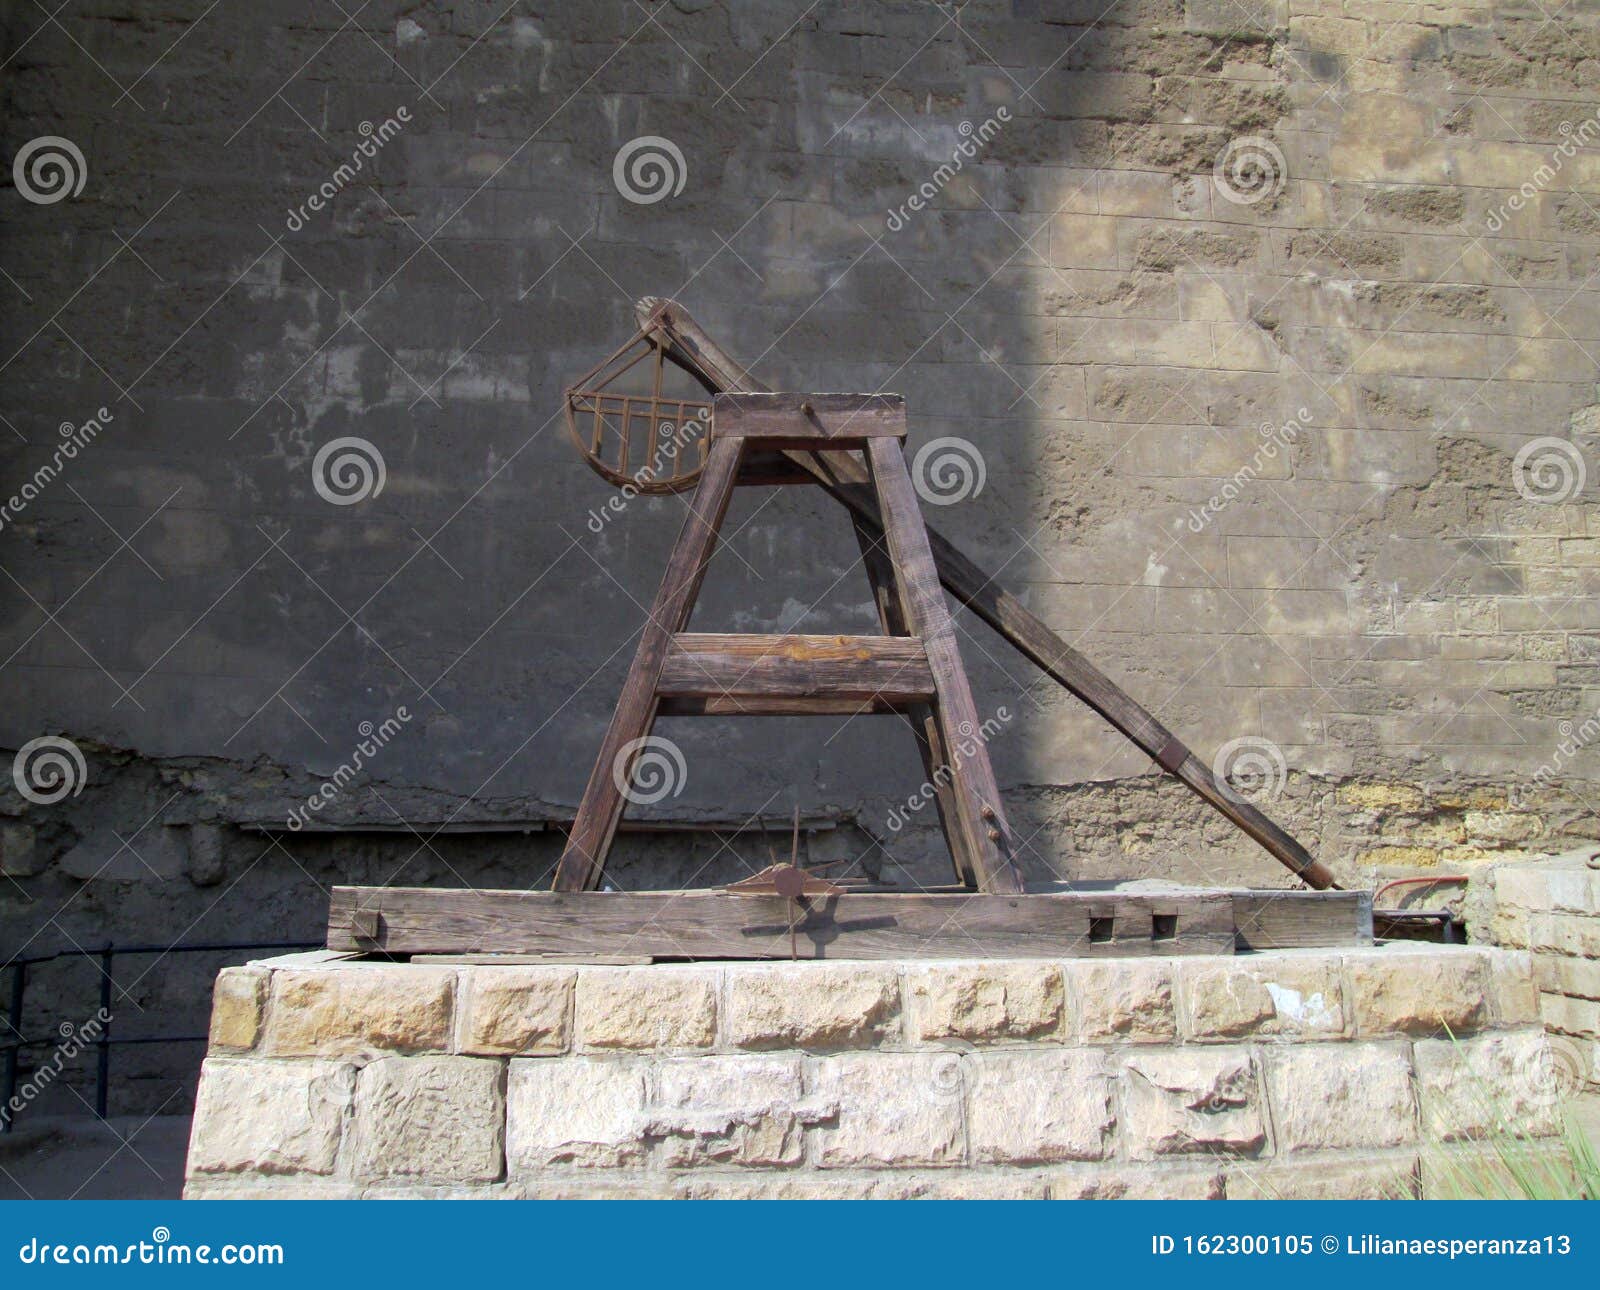 ancient catapult in the citadel of saladin